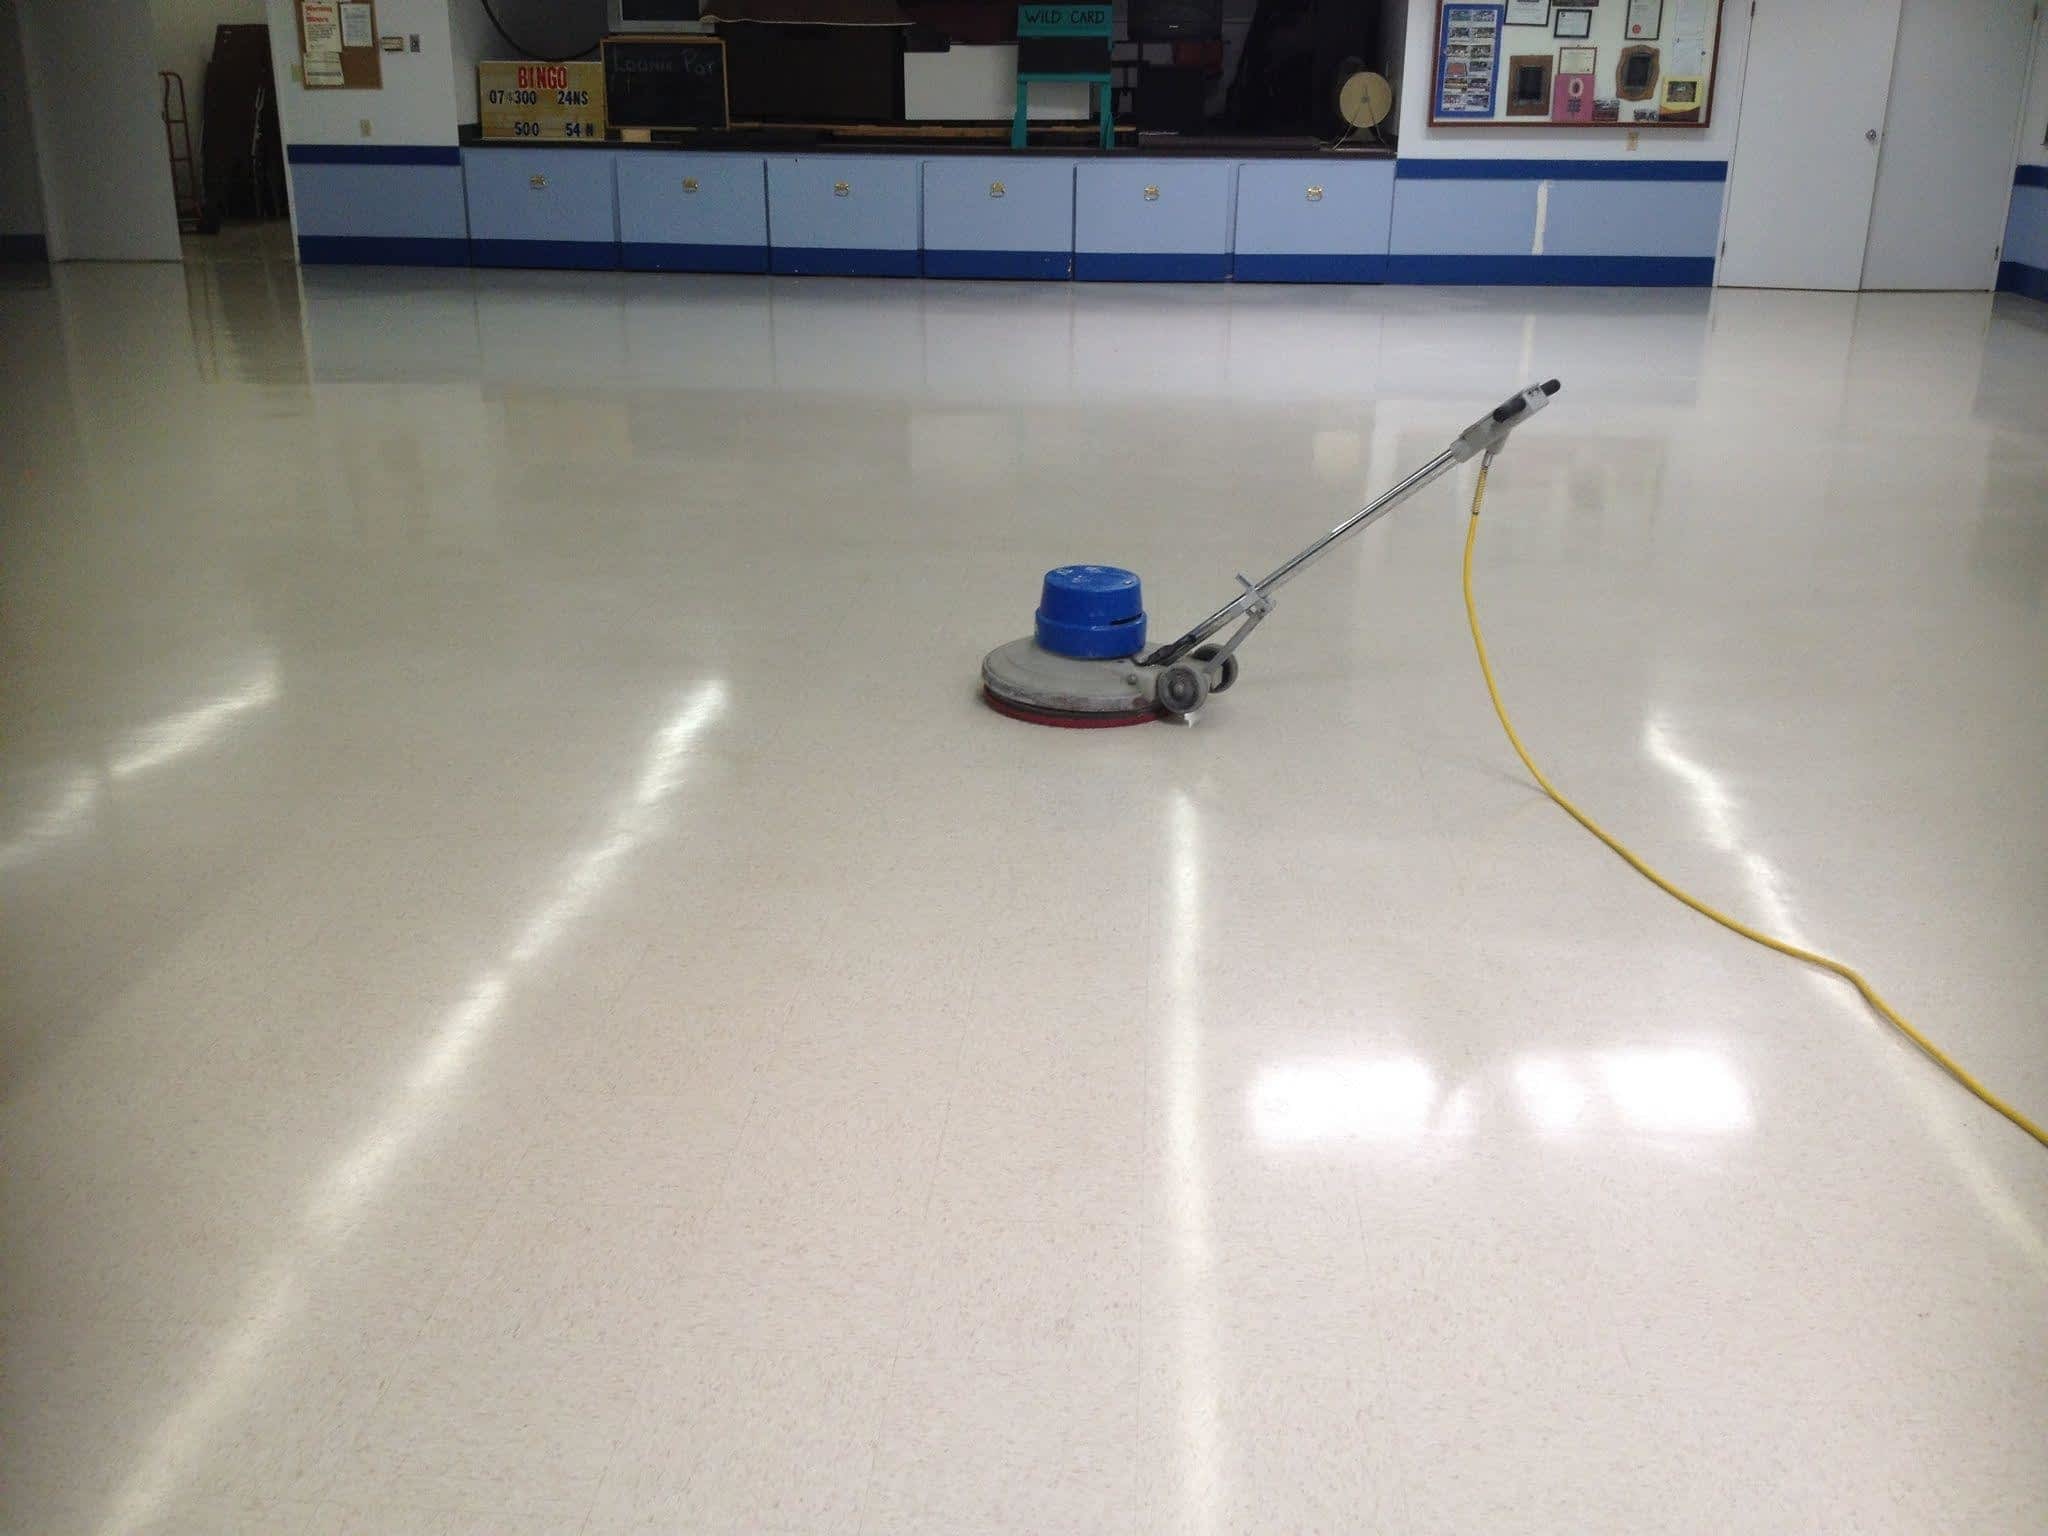 photo Done Right Commercial Cleaning Inc